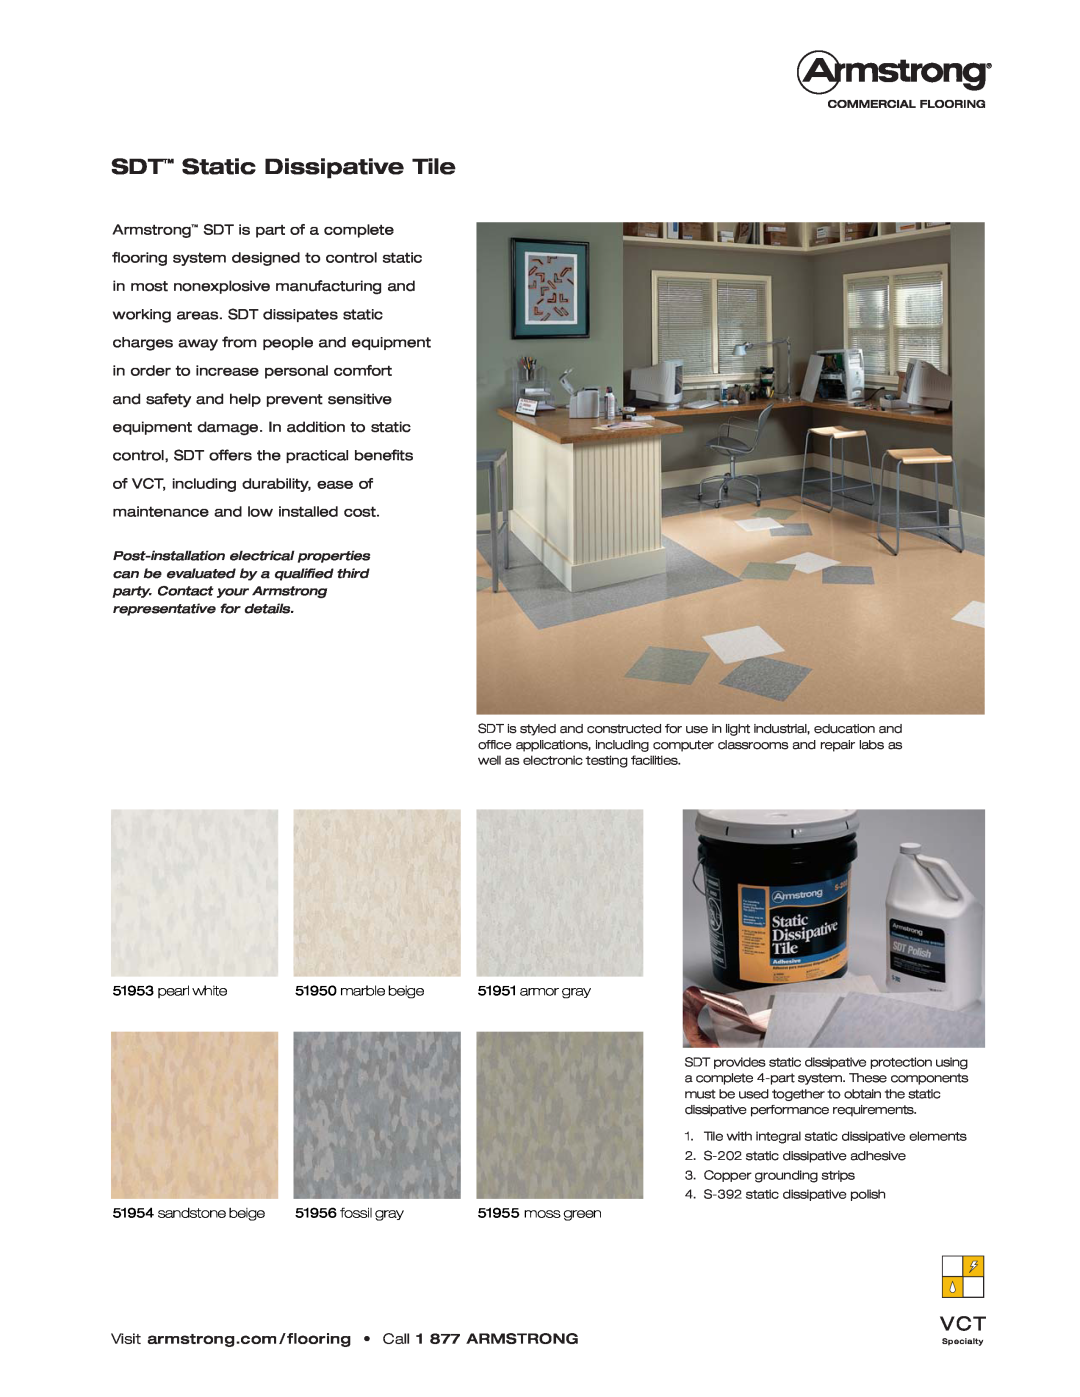 Armstrong World Industries Flooring manual SDT Static Dissipative Tile, pearl white, marble beige, armor gray, fossil gray 